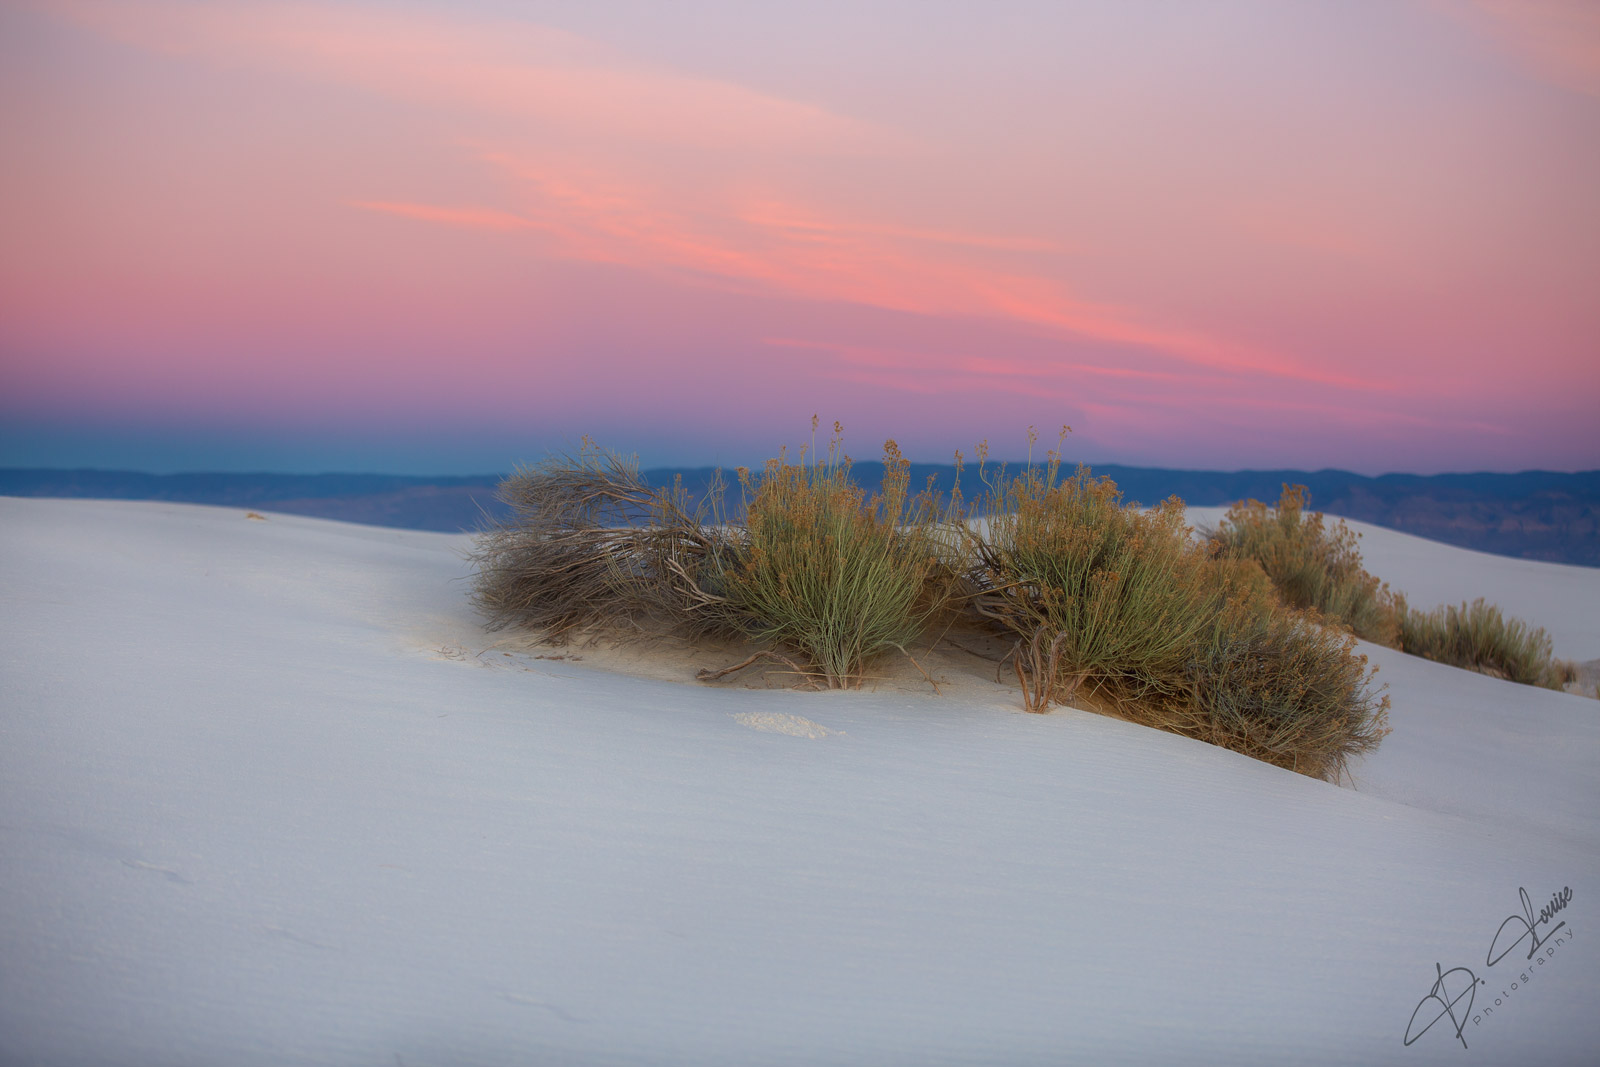 The pure white gypsum’s reflective glow of White Sands National Park glows as the last bit of sun paints the sky in a pink...